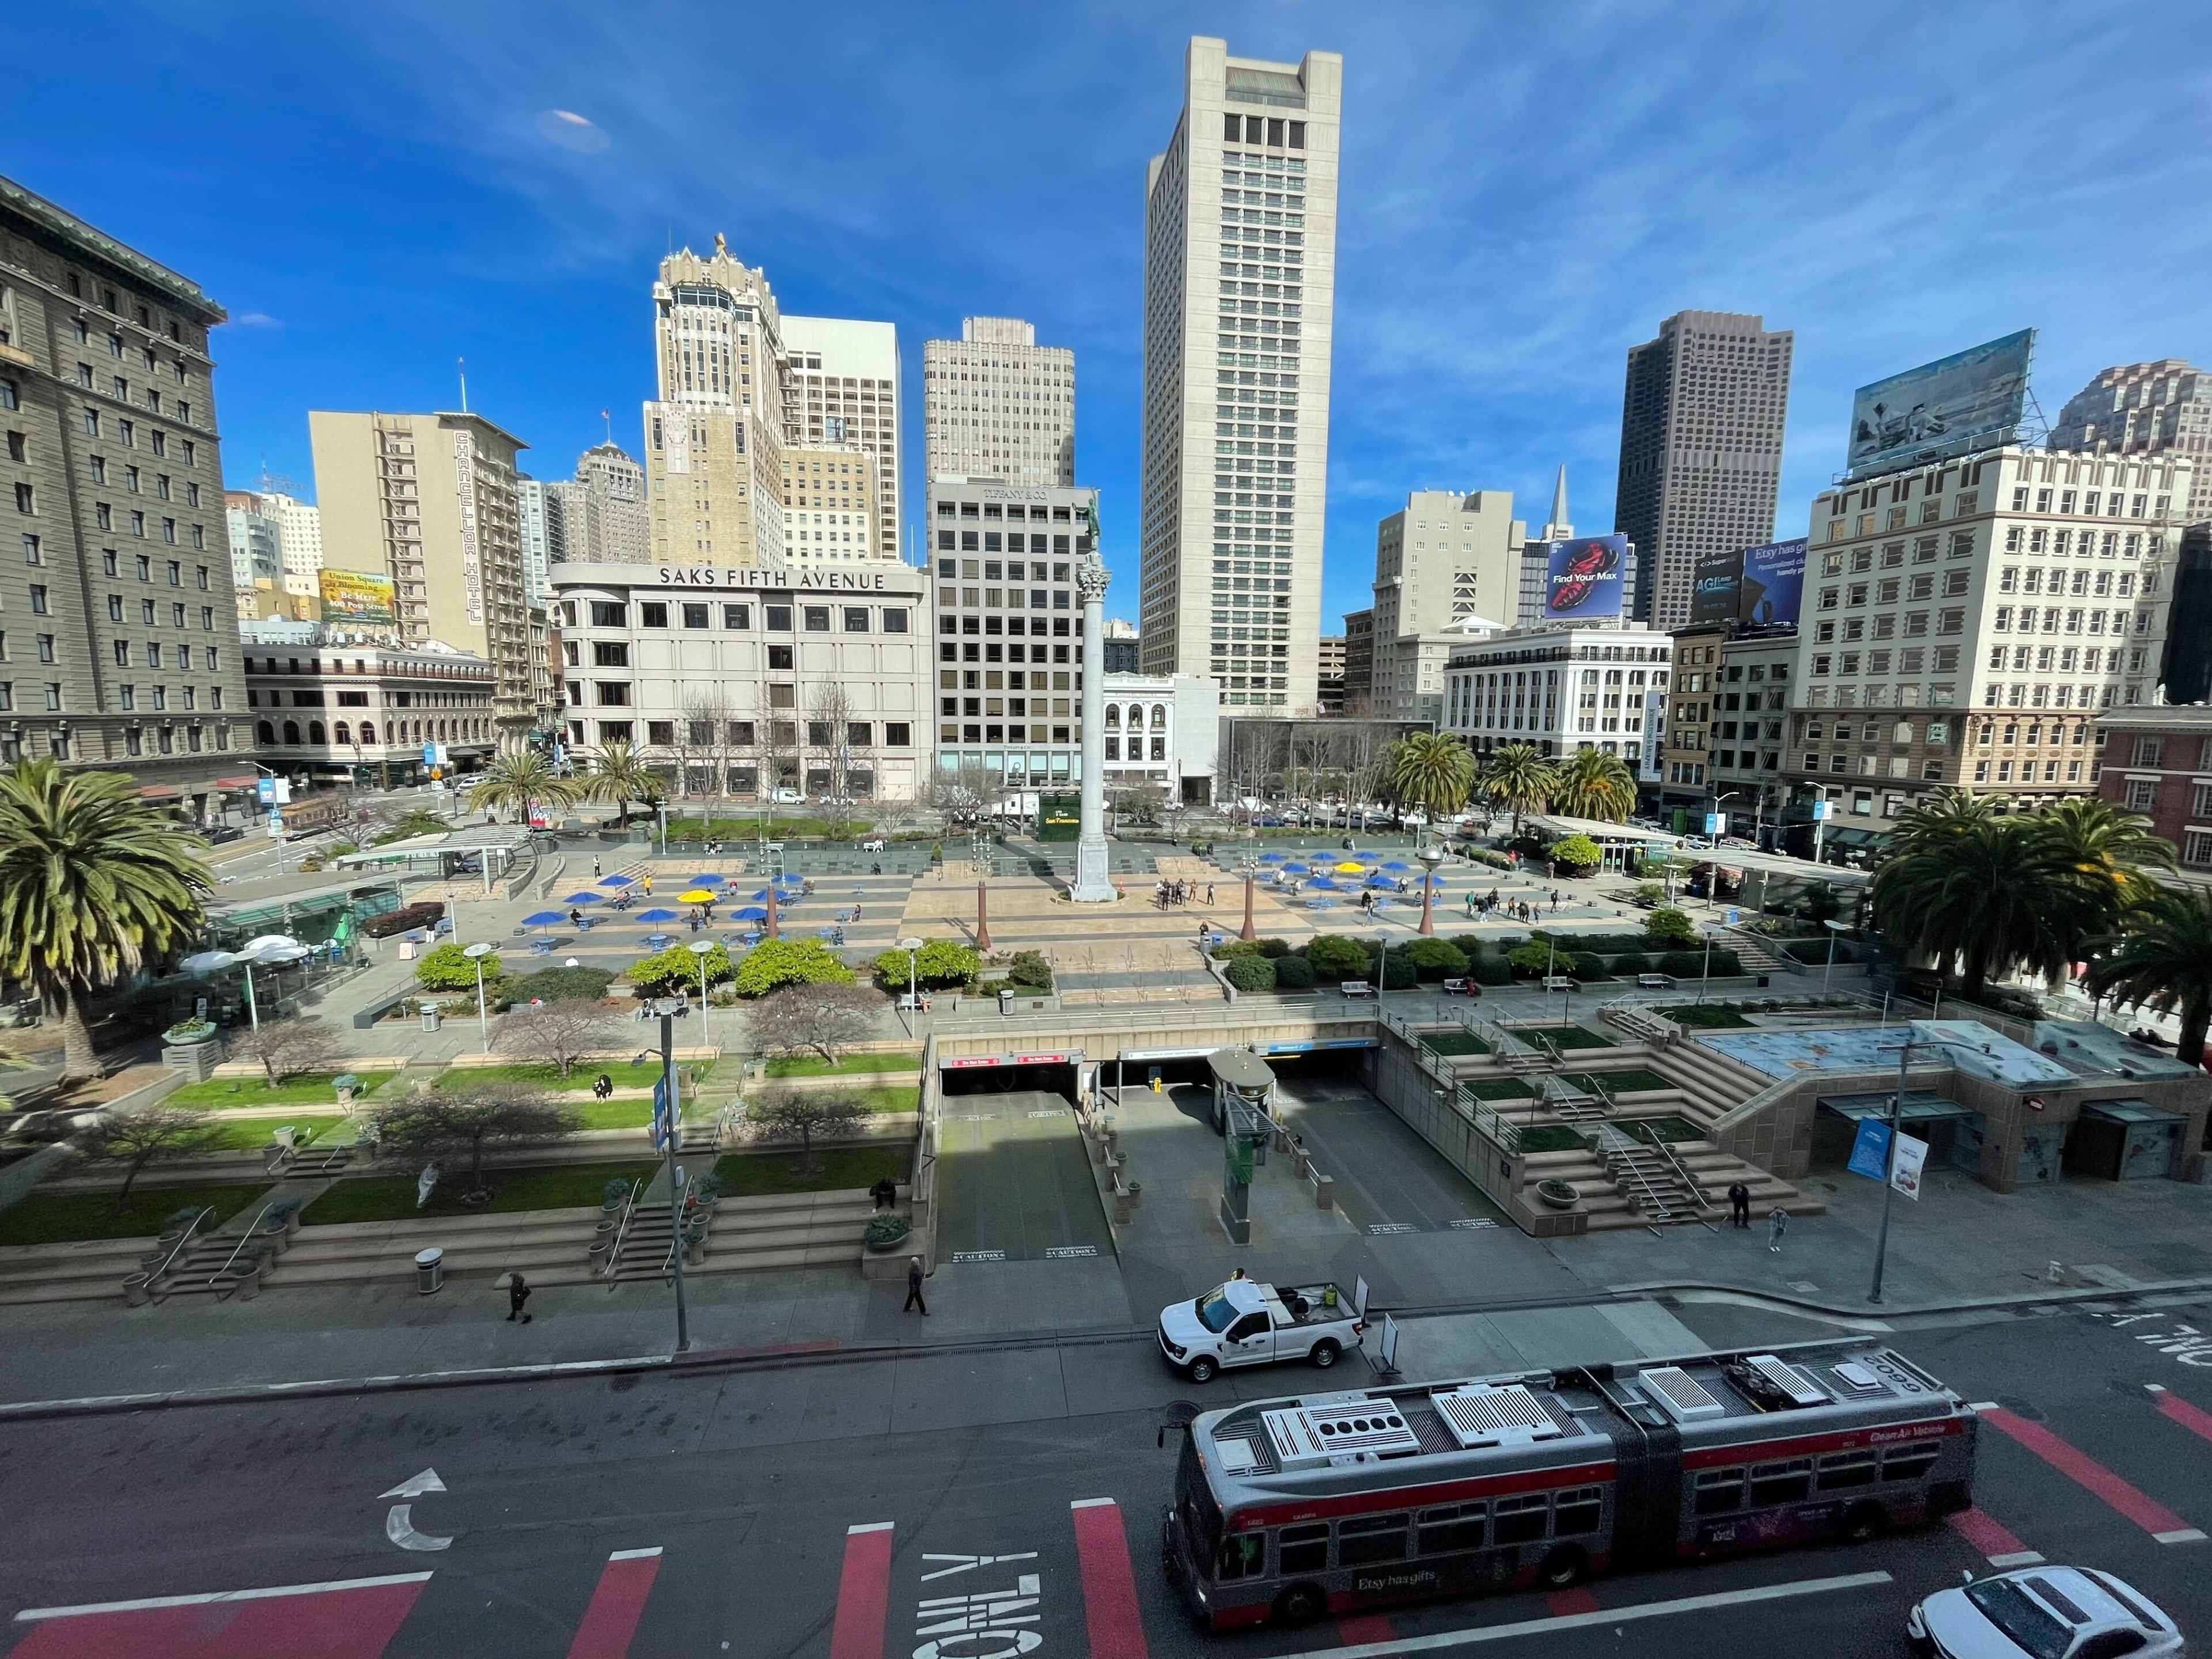 A city skyline and shaded streets surround a sunlit central plaza.